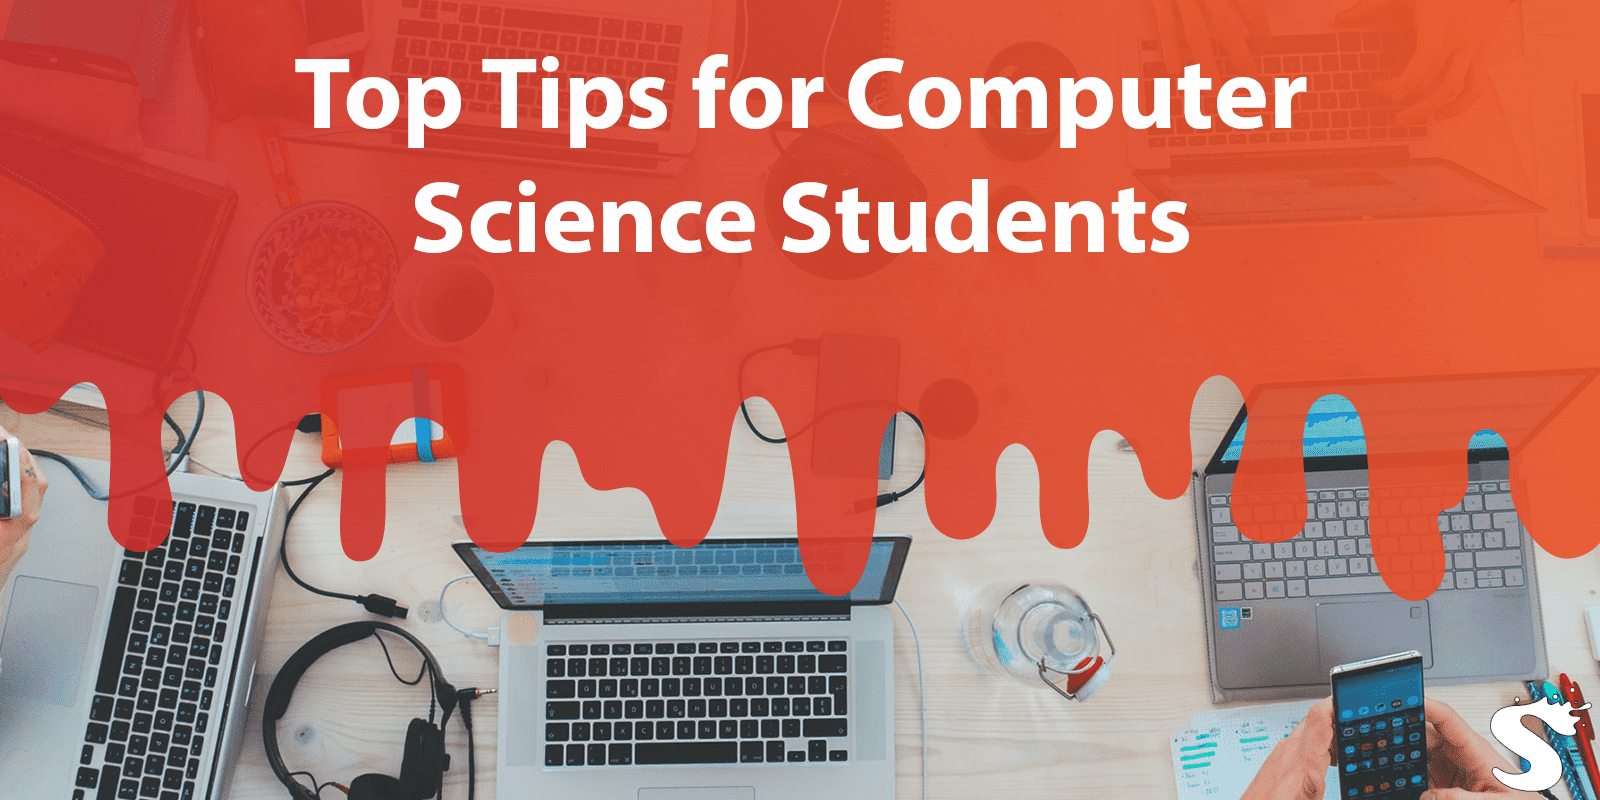 Top Tips for Computer Science Students